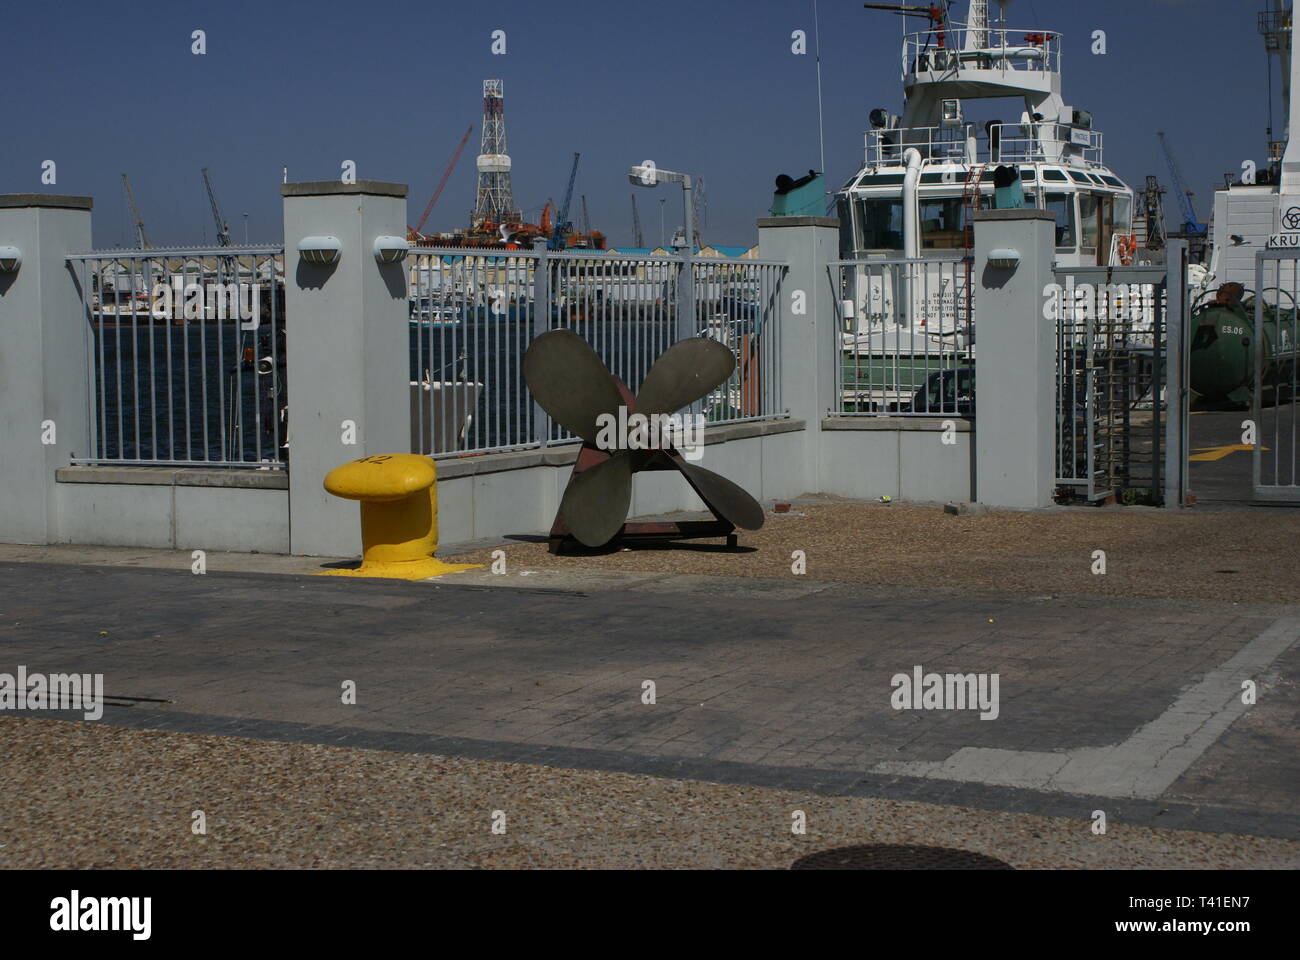 The art object is the propeller on the waterfront Victoria Basin. Cape Town. SA. Stock Photo